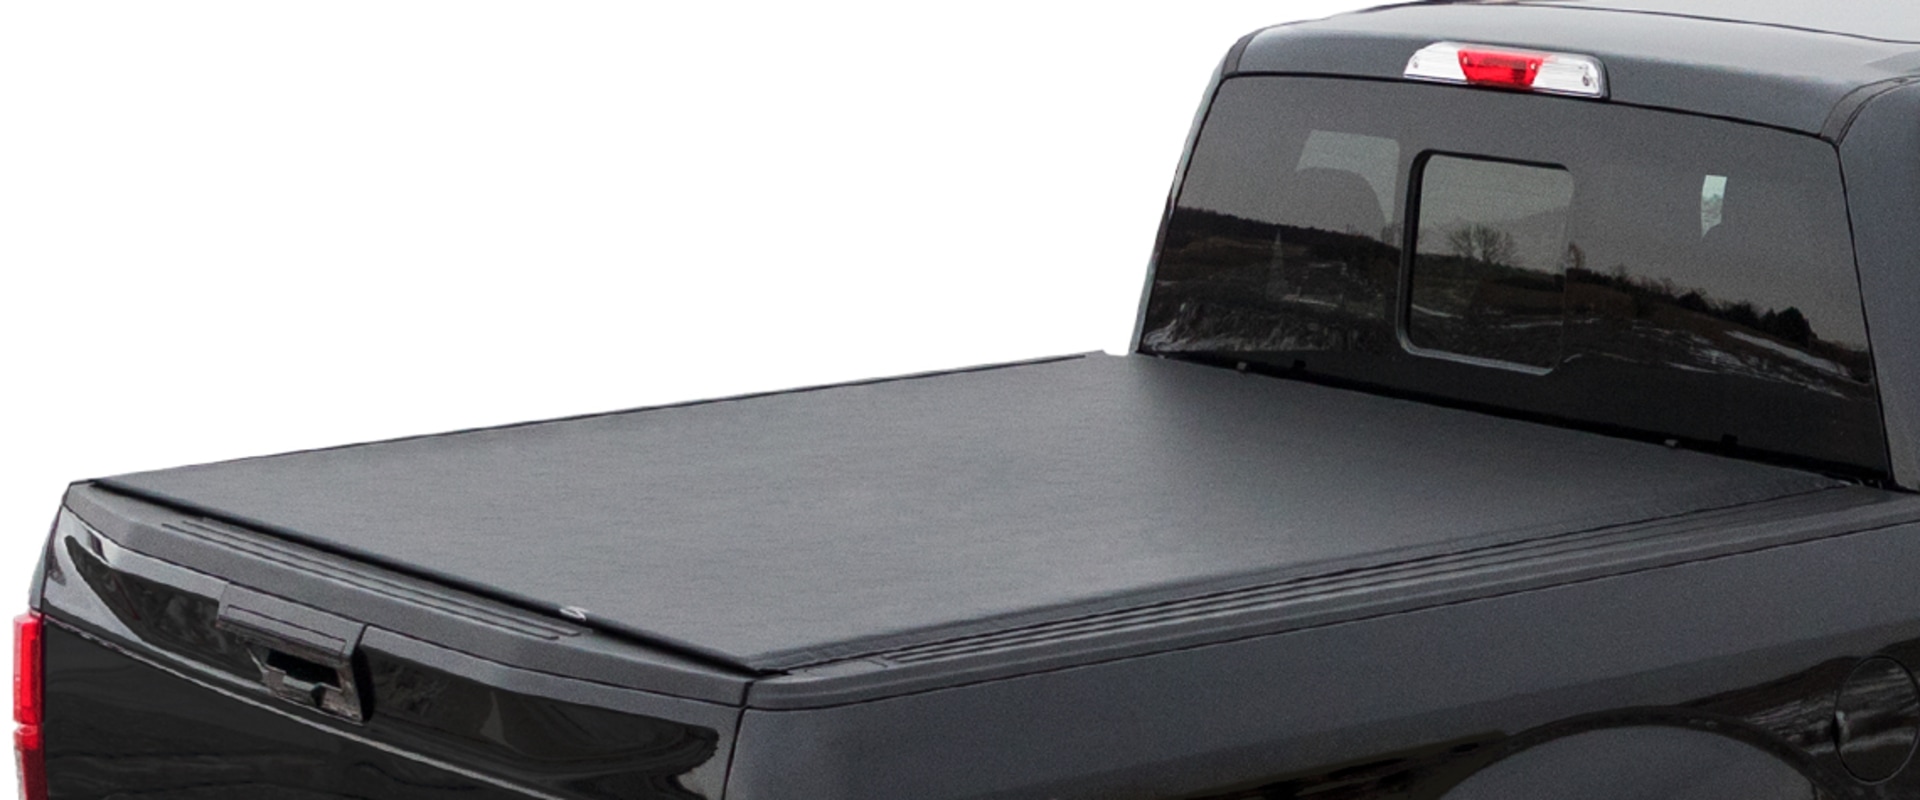 A Comprehensive Look at Bed Liners and Tonneau Covers for Ford Accessories